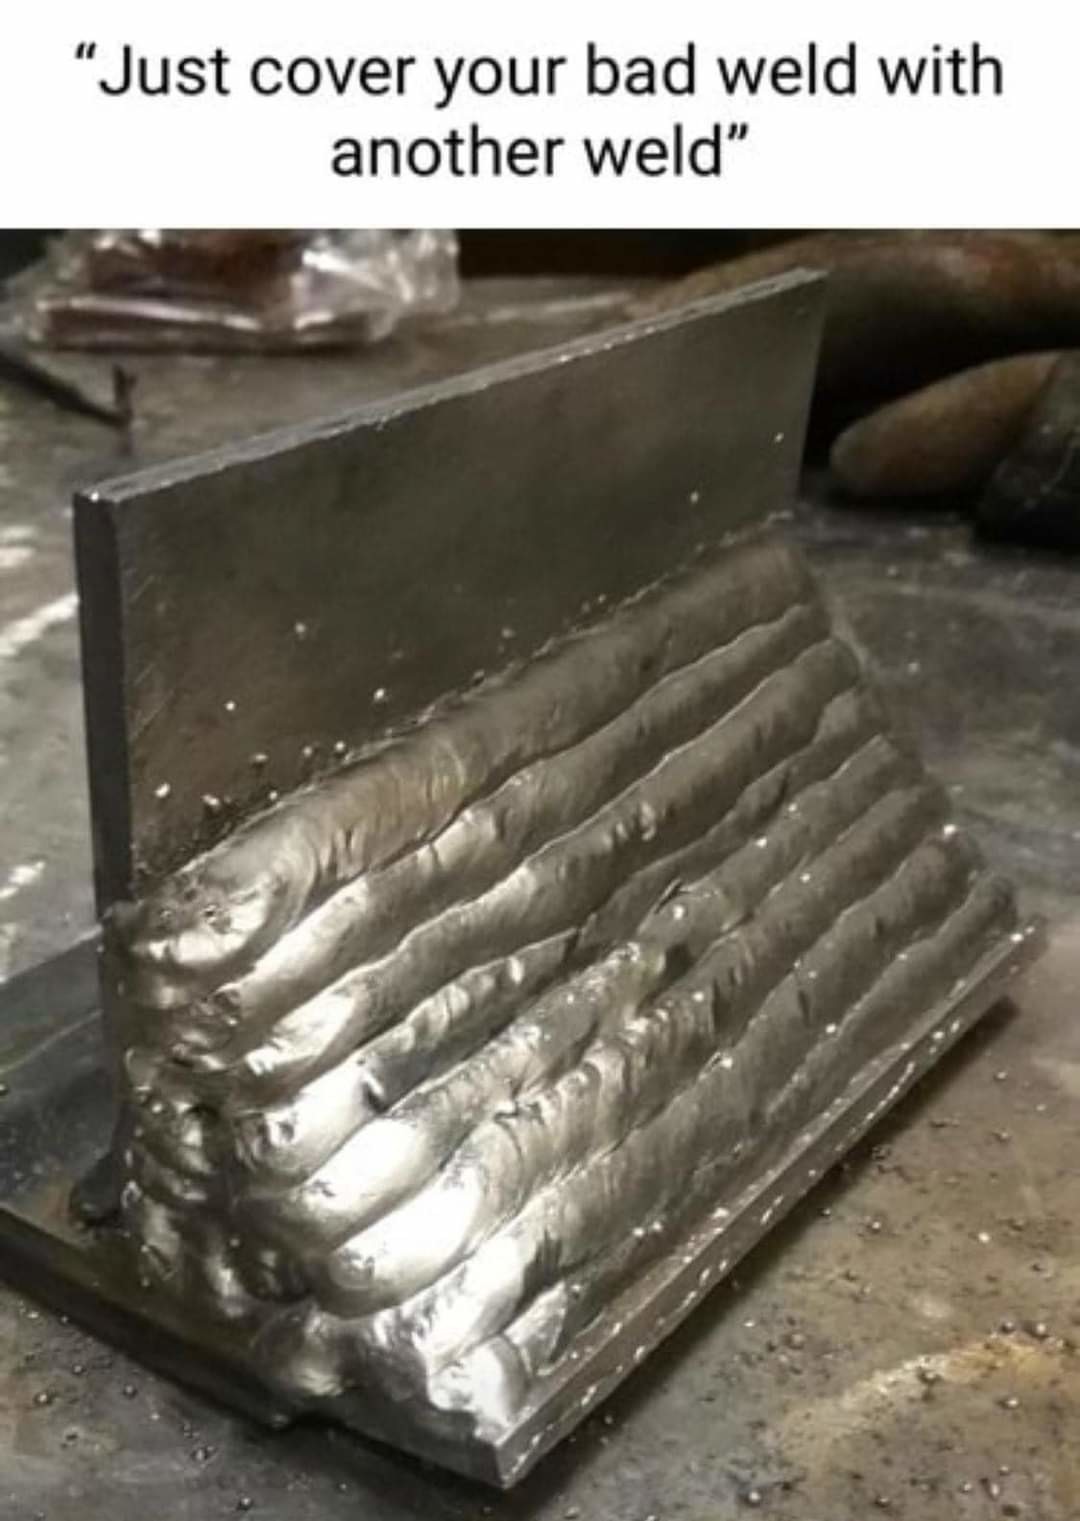 Welder gore. .. I actually fired up my arc welder a few days back. Just needed to join a couple of pieces, nothing fancy, something I've done in the past plenty of times. The h